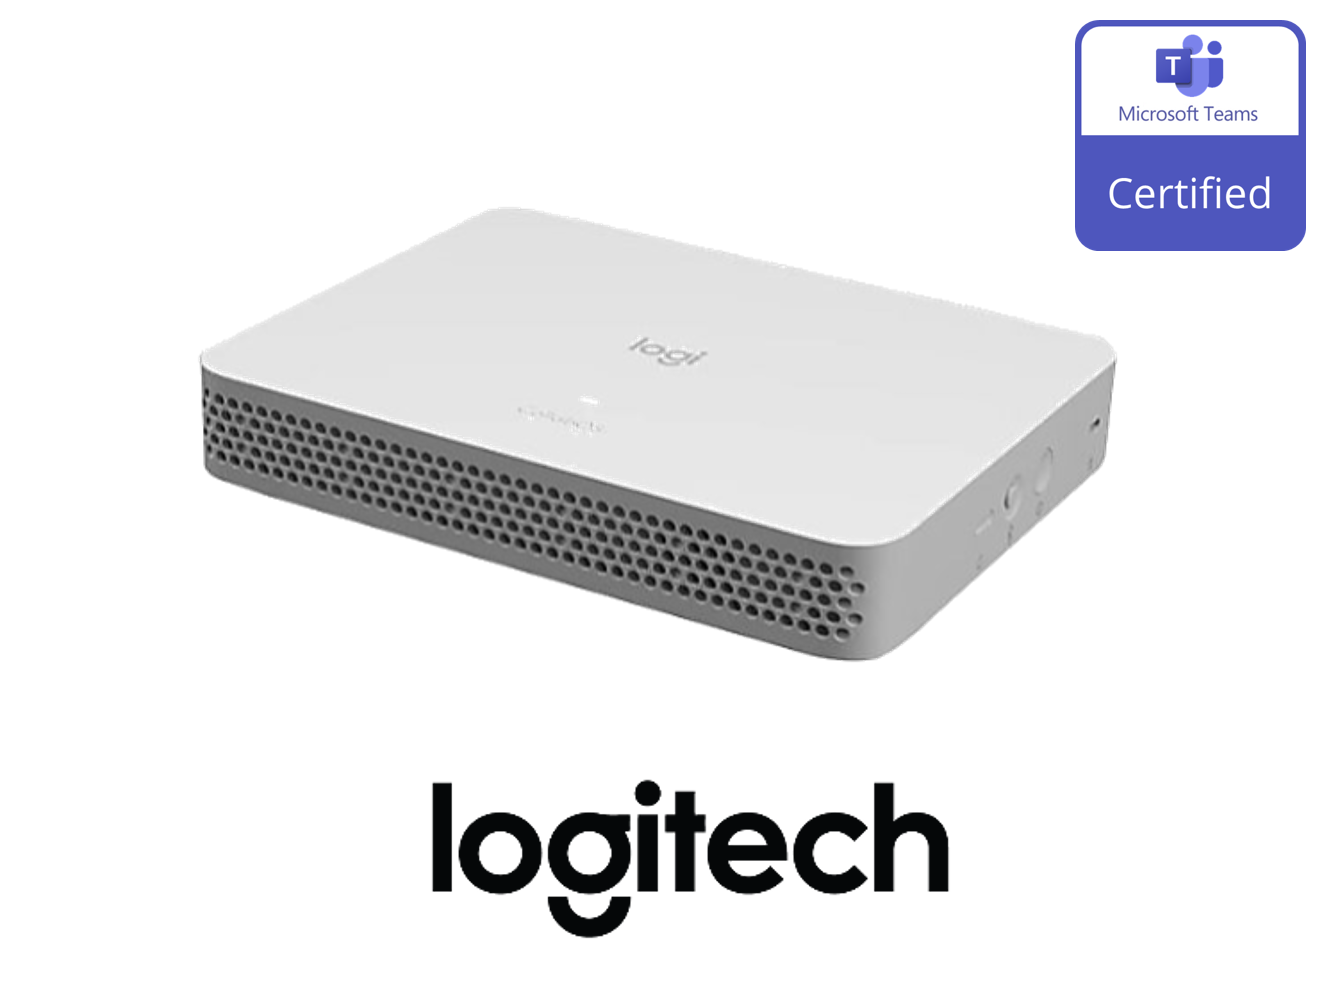 Logitech RoomMate Comput Appliance Certified for Microsoft Teams